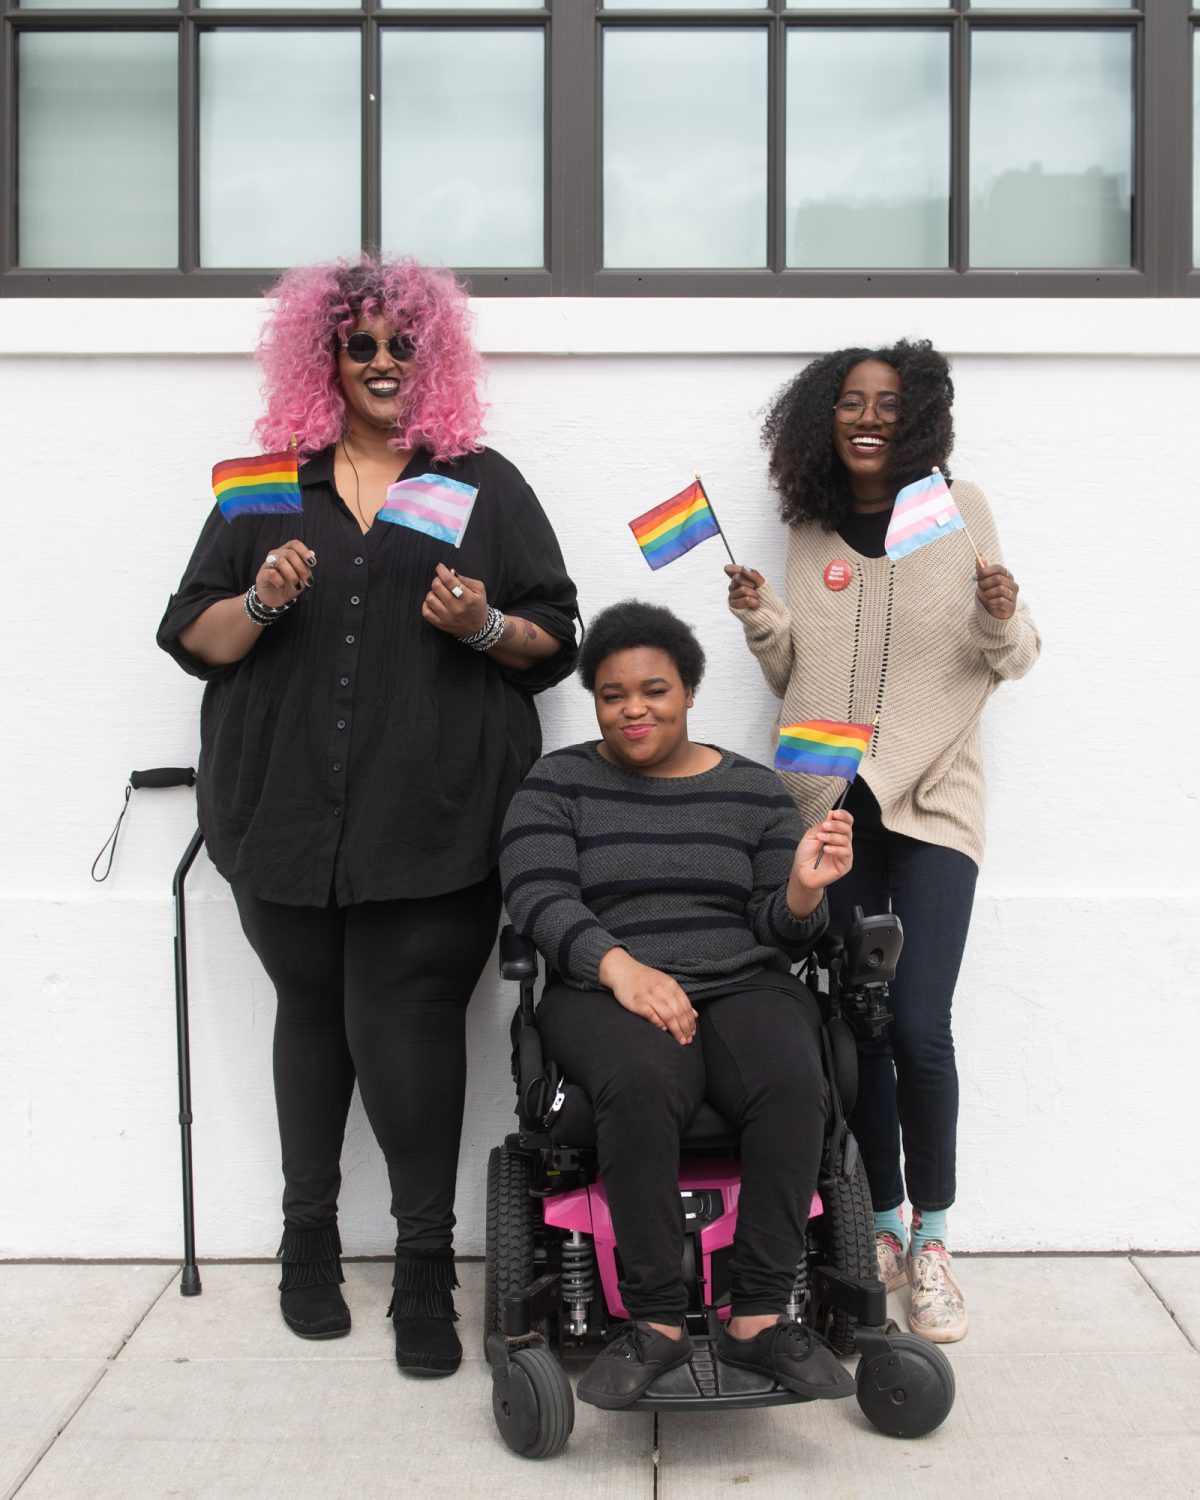 Three Black and disabled folx smile and hold mini flags. On the left, a non-binary person holds both a rainbow pride flag and a transgender pride flag, while a cane rests behind her. In the middle, a non-binary person waves the rainbow flag while in their power wheelchair. On the right, a femme waves both a rainbow and transgender pride flag.